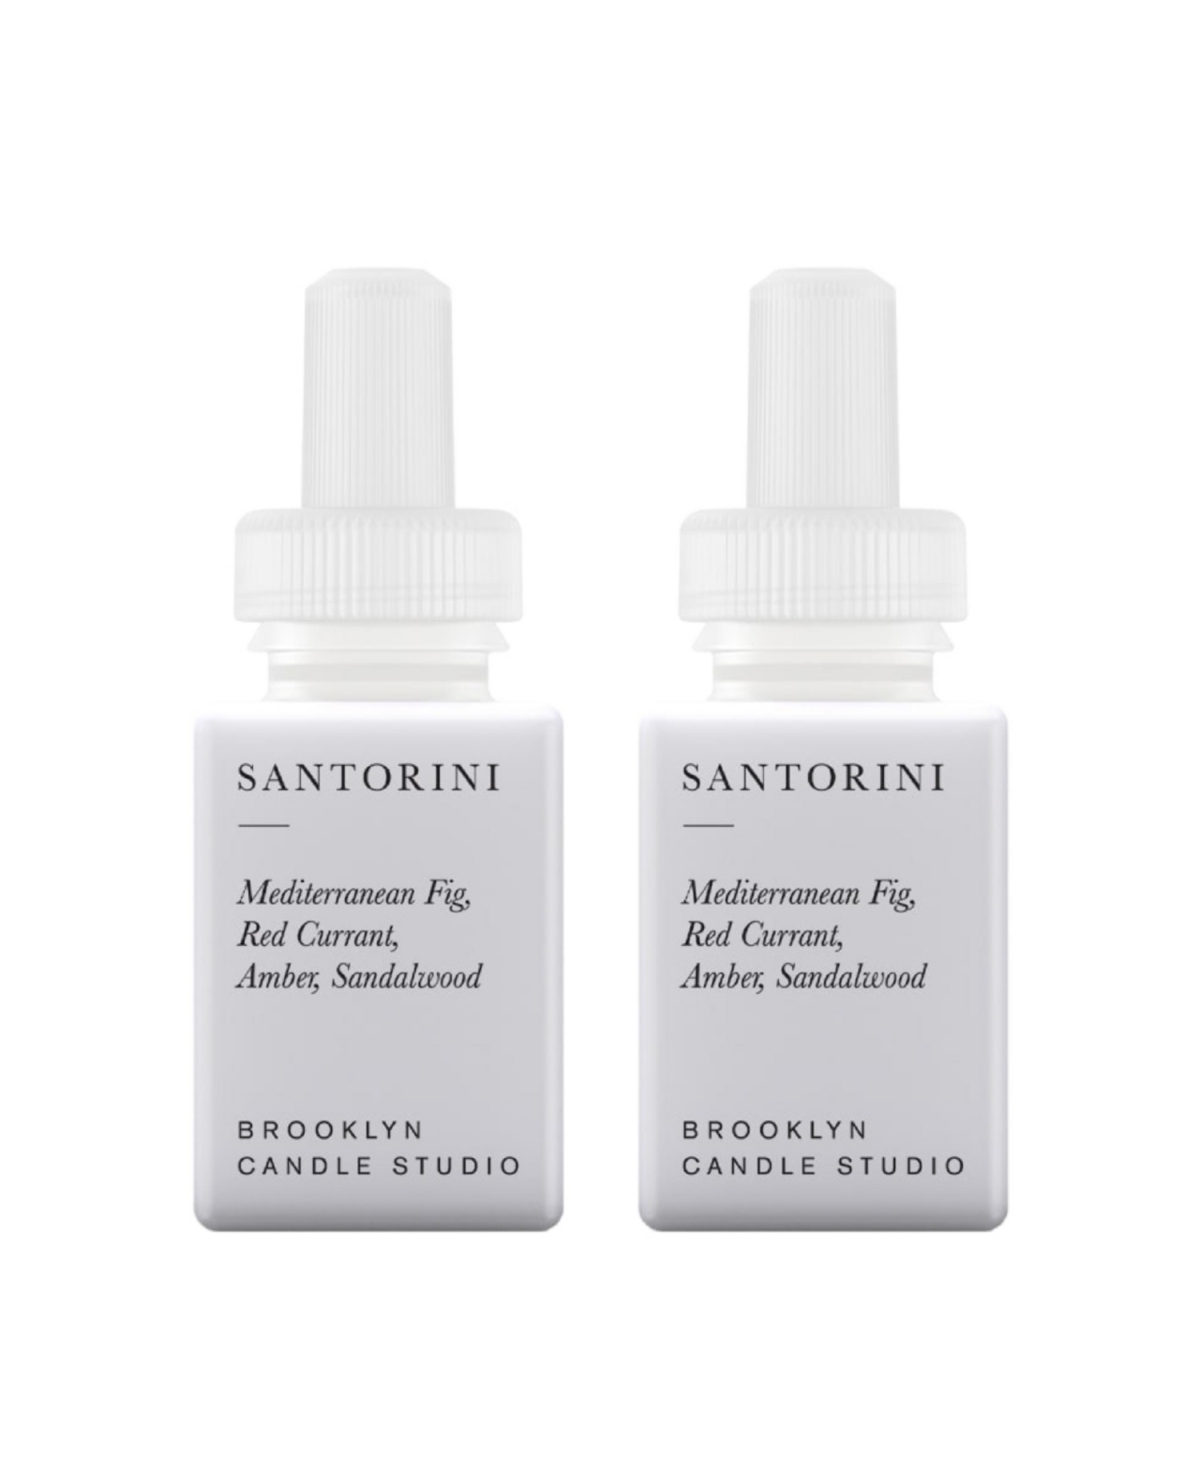 Brooklyn Candle Studio - Santorini - Home Scent Refill - Smart Home Air Diffuser Fragrance - Up to 120-Hours of Luxury Fragrance per Vial - Clean